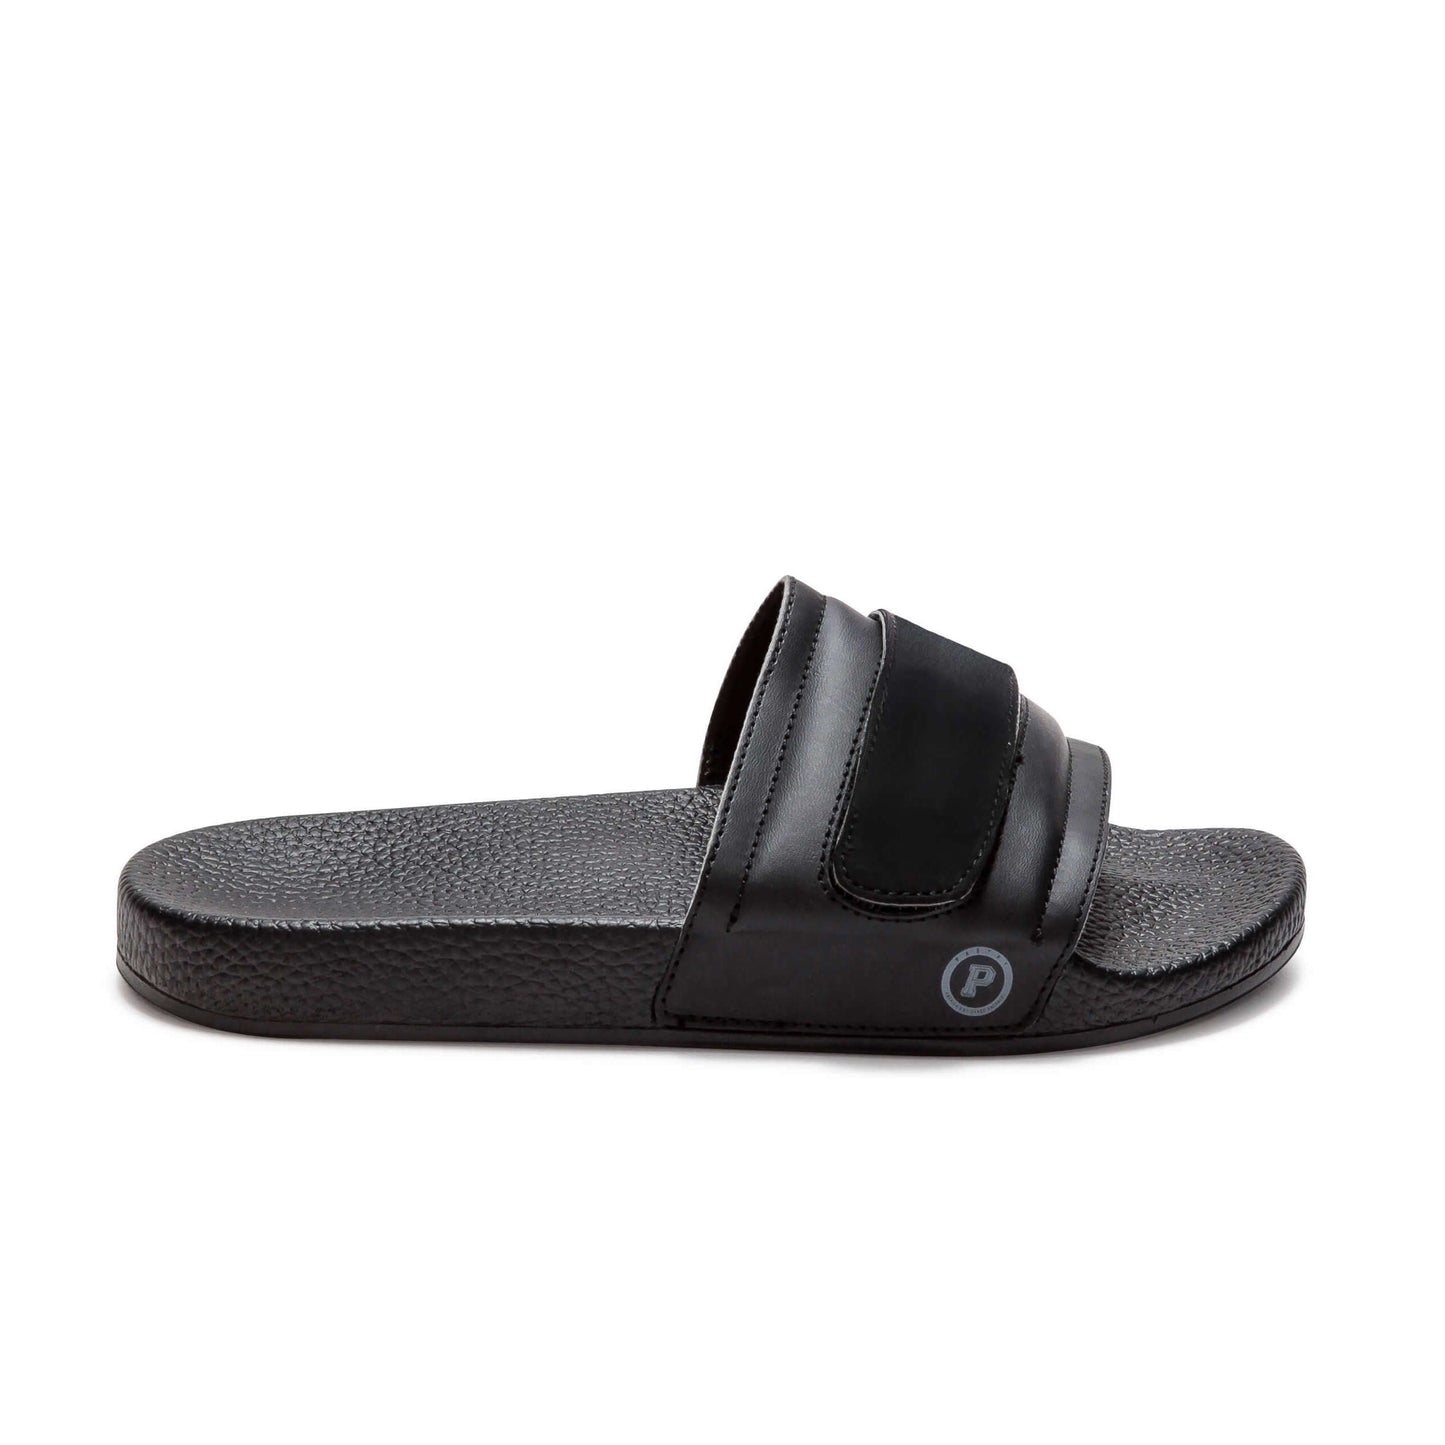 Pastry Adult Women's Recovery Slide in Black with Blank Straps lateral view